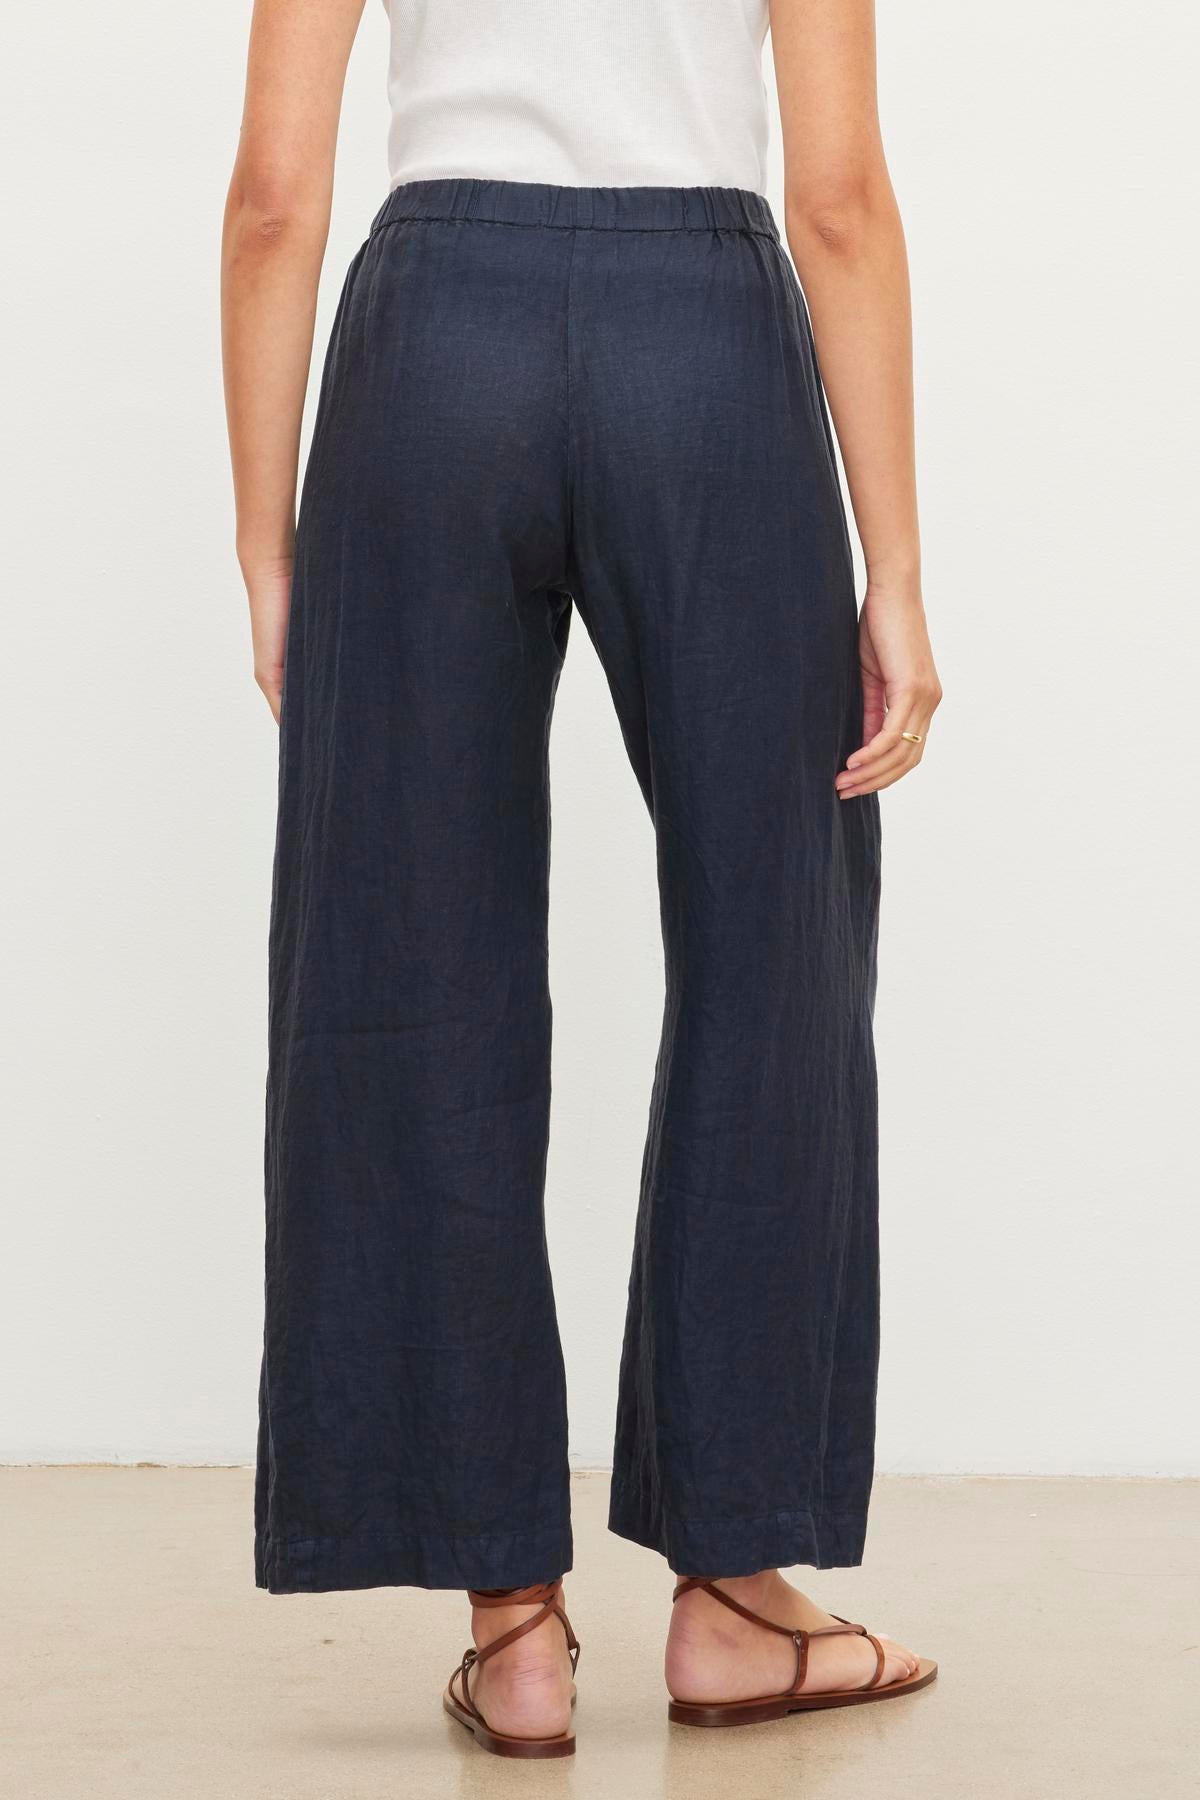 The woman's back view in Velvet by Graham & Spencer's LOLA LINEN PANT with an elastic waist.-36002607661249